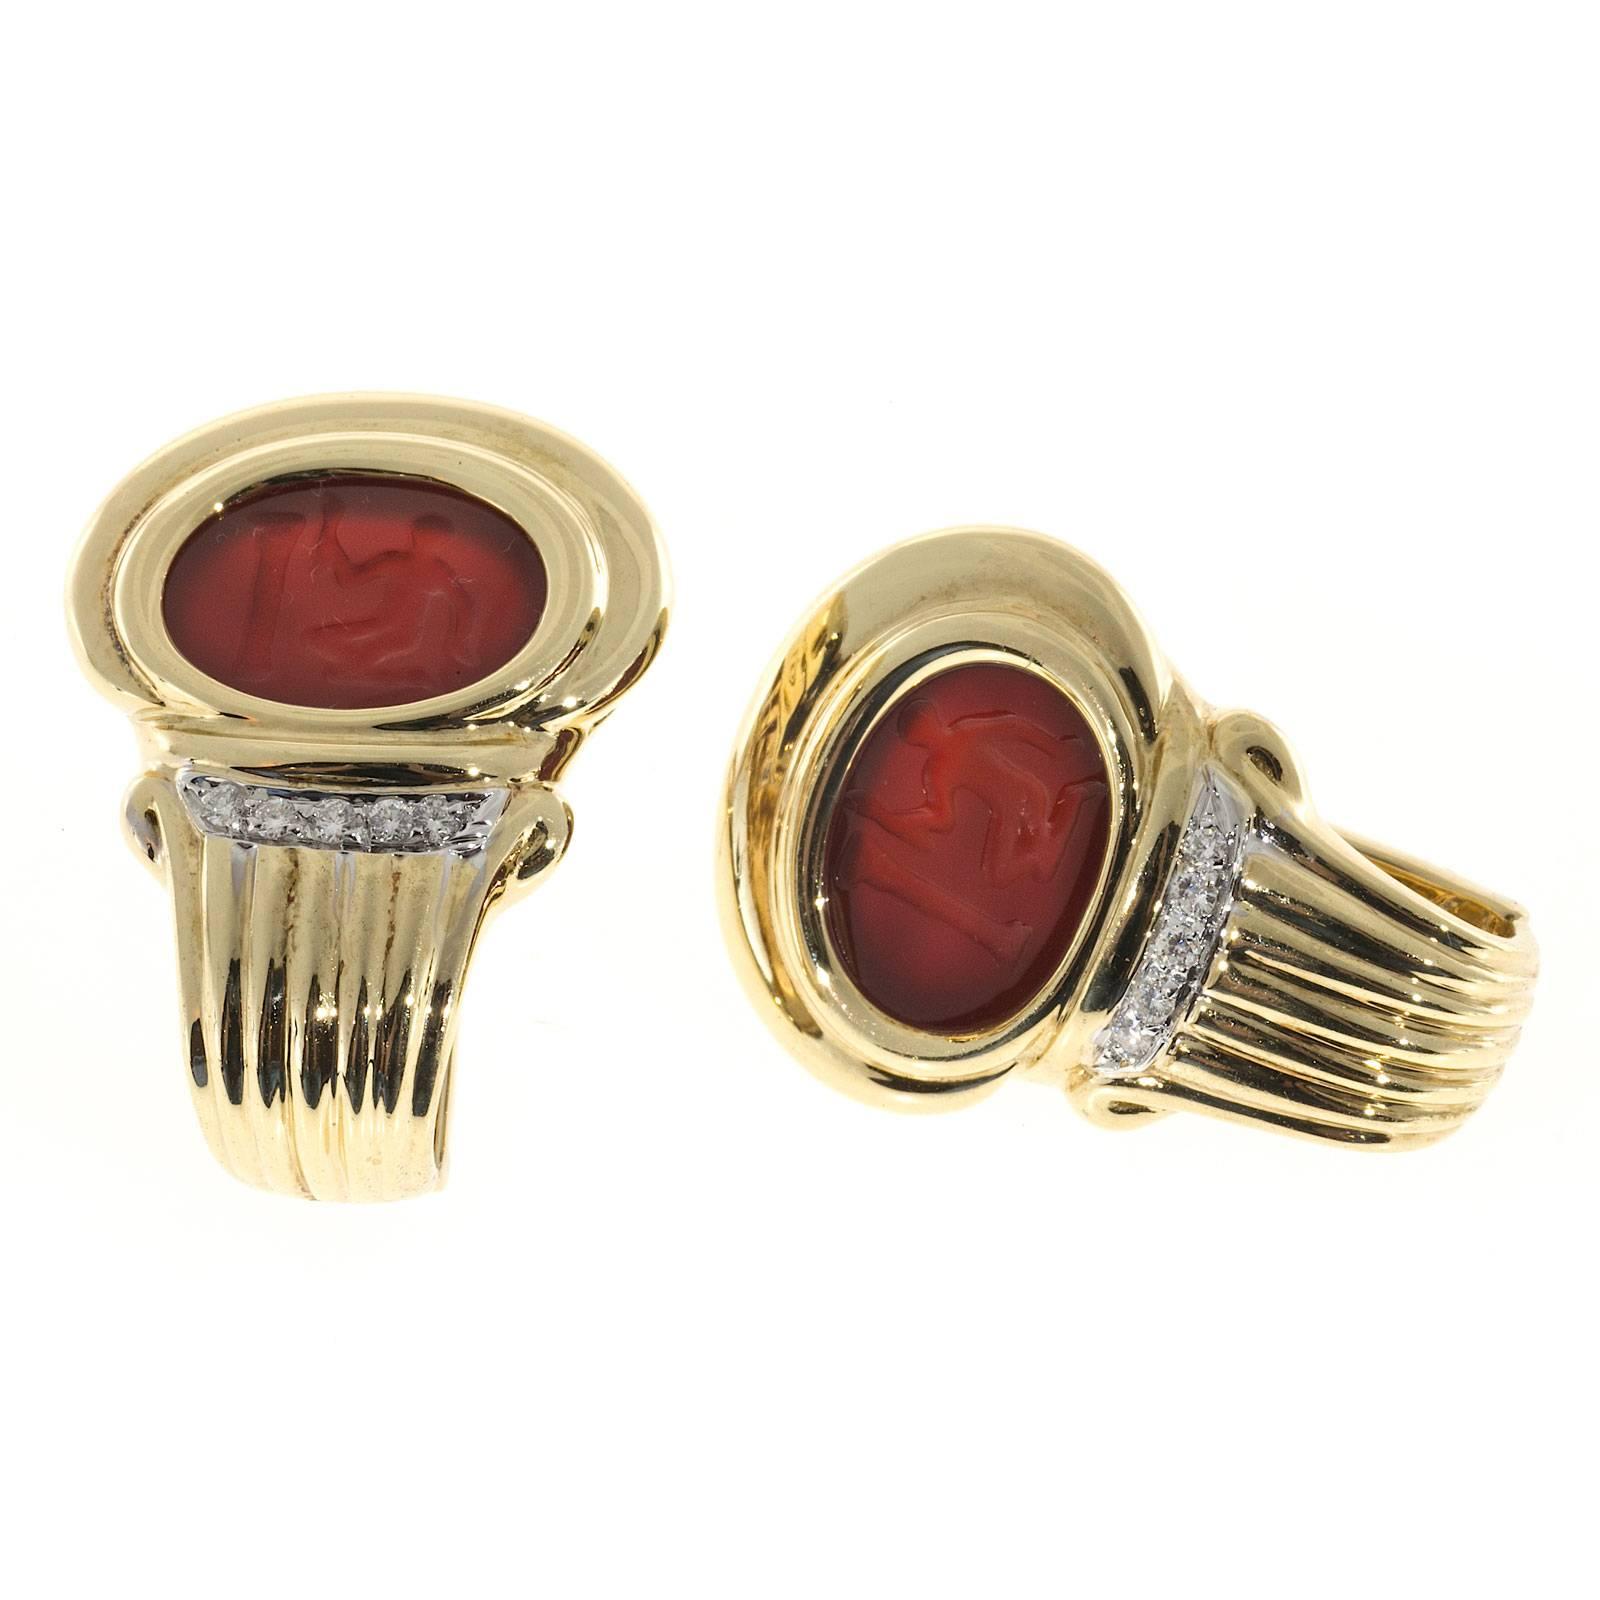 Italian carved rich red color Carnelian hard stones with diamonds in a white gold strip. Solid 18k heavy secure clip post earrings.

10 full cut diamonds approx. total weight .15cts, F, VS
2 15X11mm carved Carnelian hard stones
18k Yellow